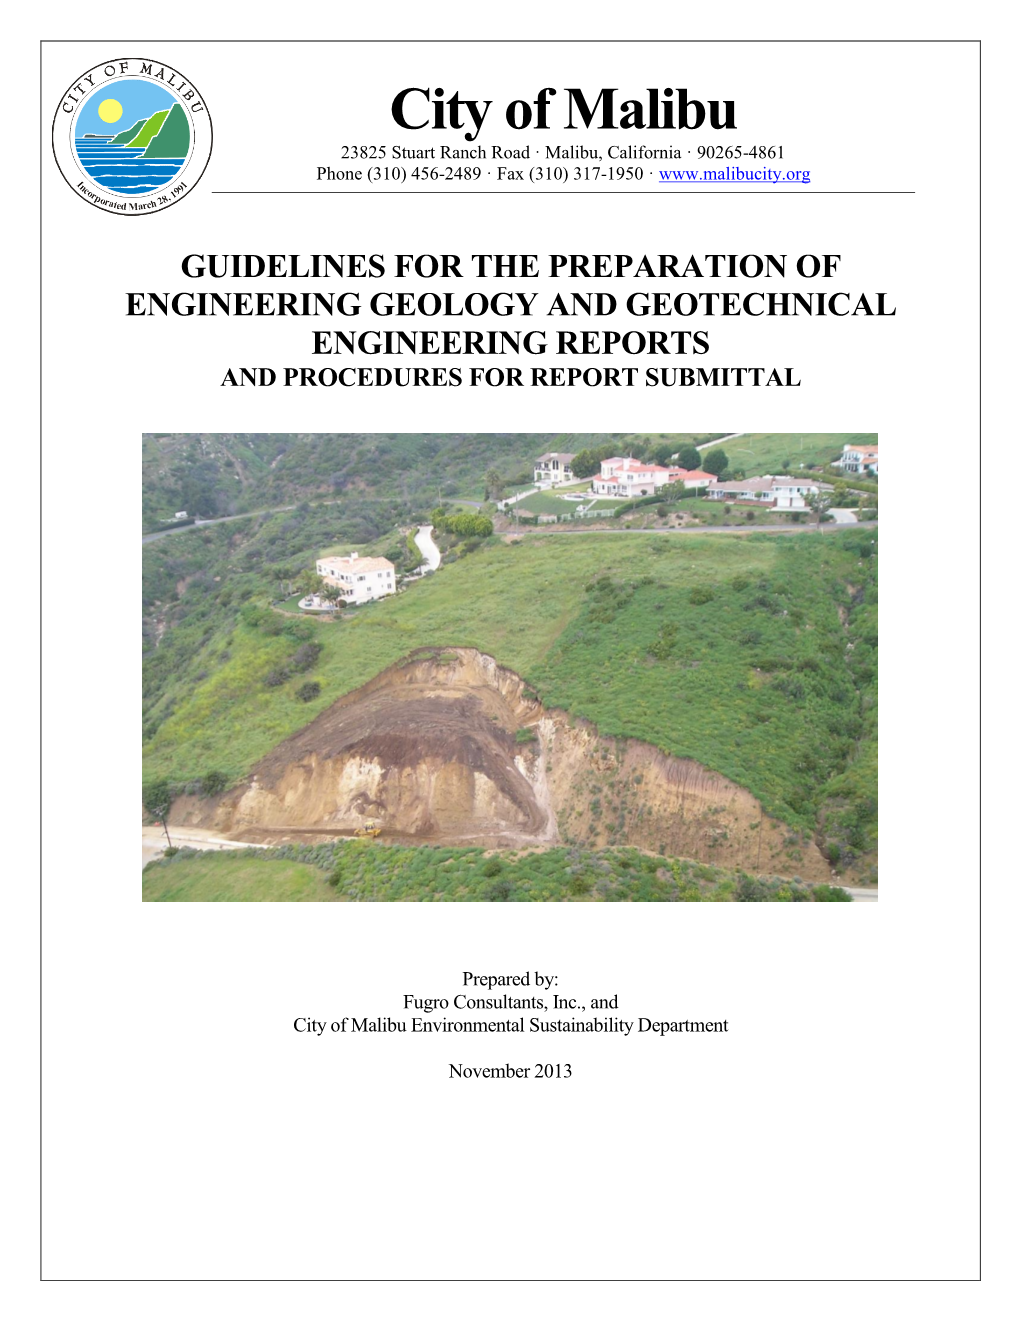 Guidelines for the Preparation of Engineering Geology and Geotechnical Engineering Reports and Procedures for Report Submittal